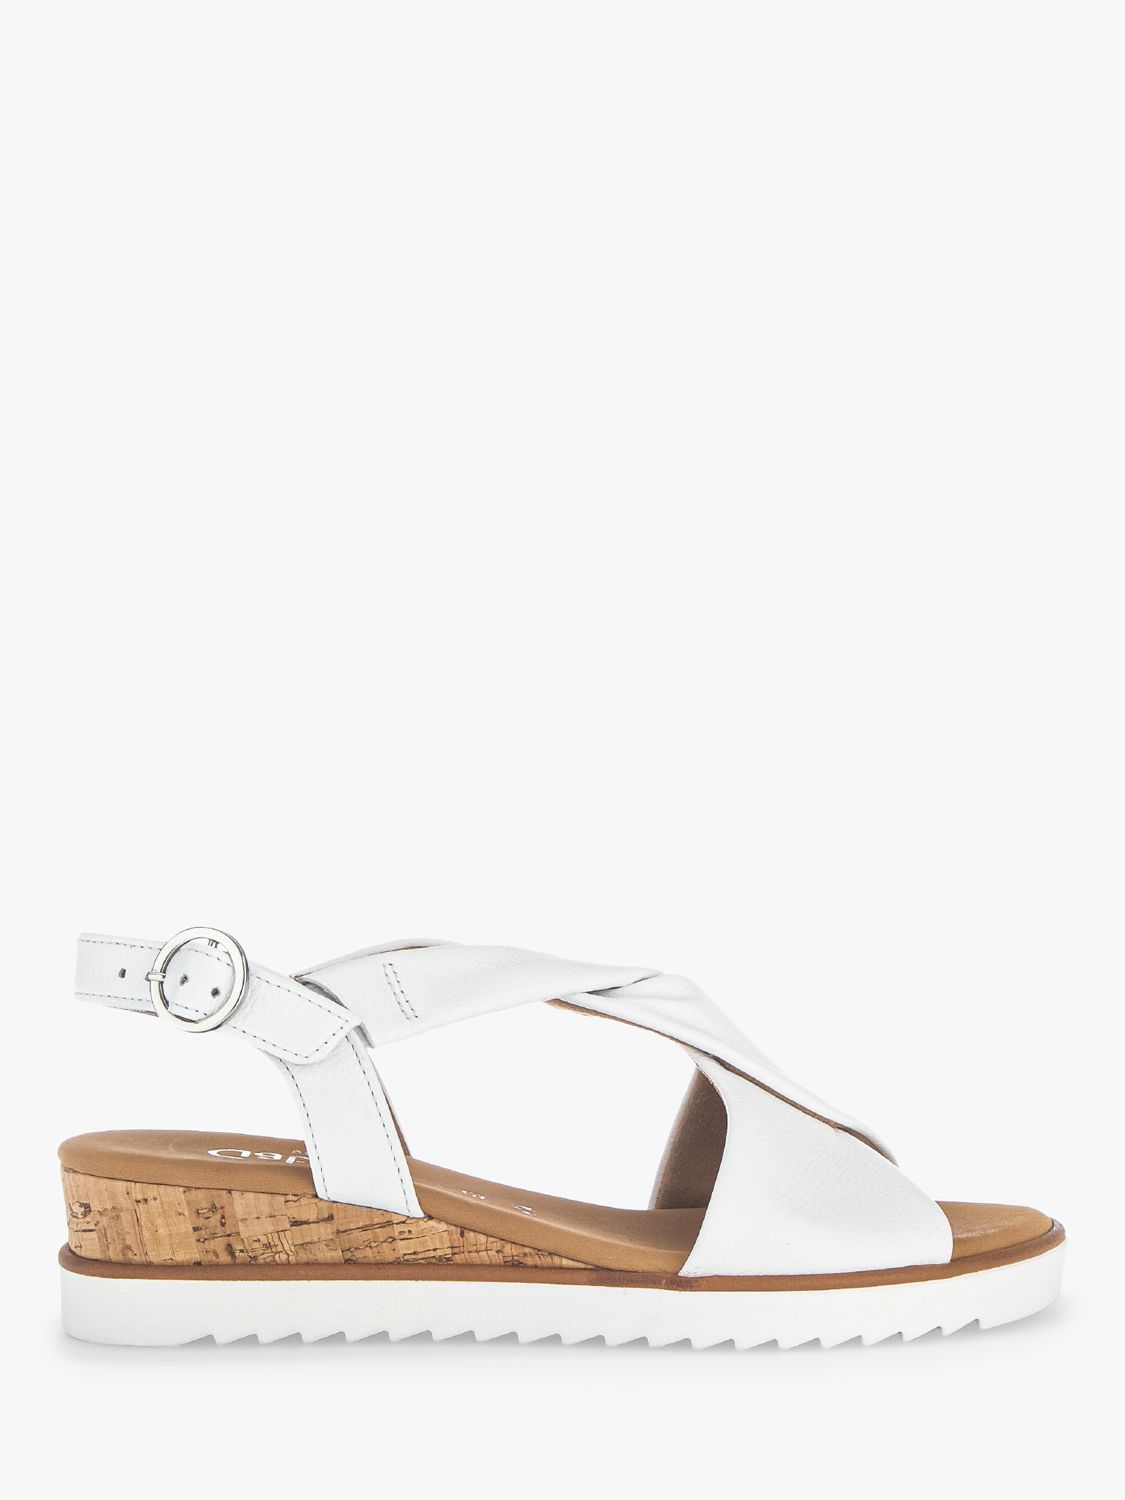 Gabor Rich Wide Fit Leather Wedge Heel Sandals, White at John Lewis ...